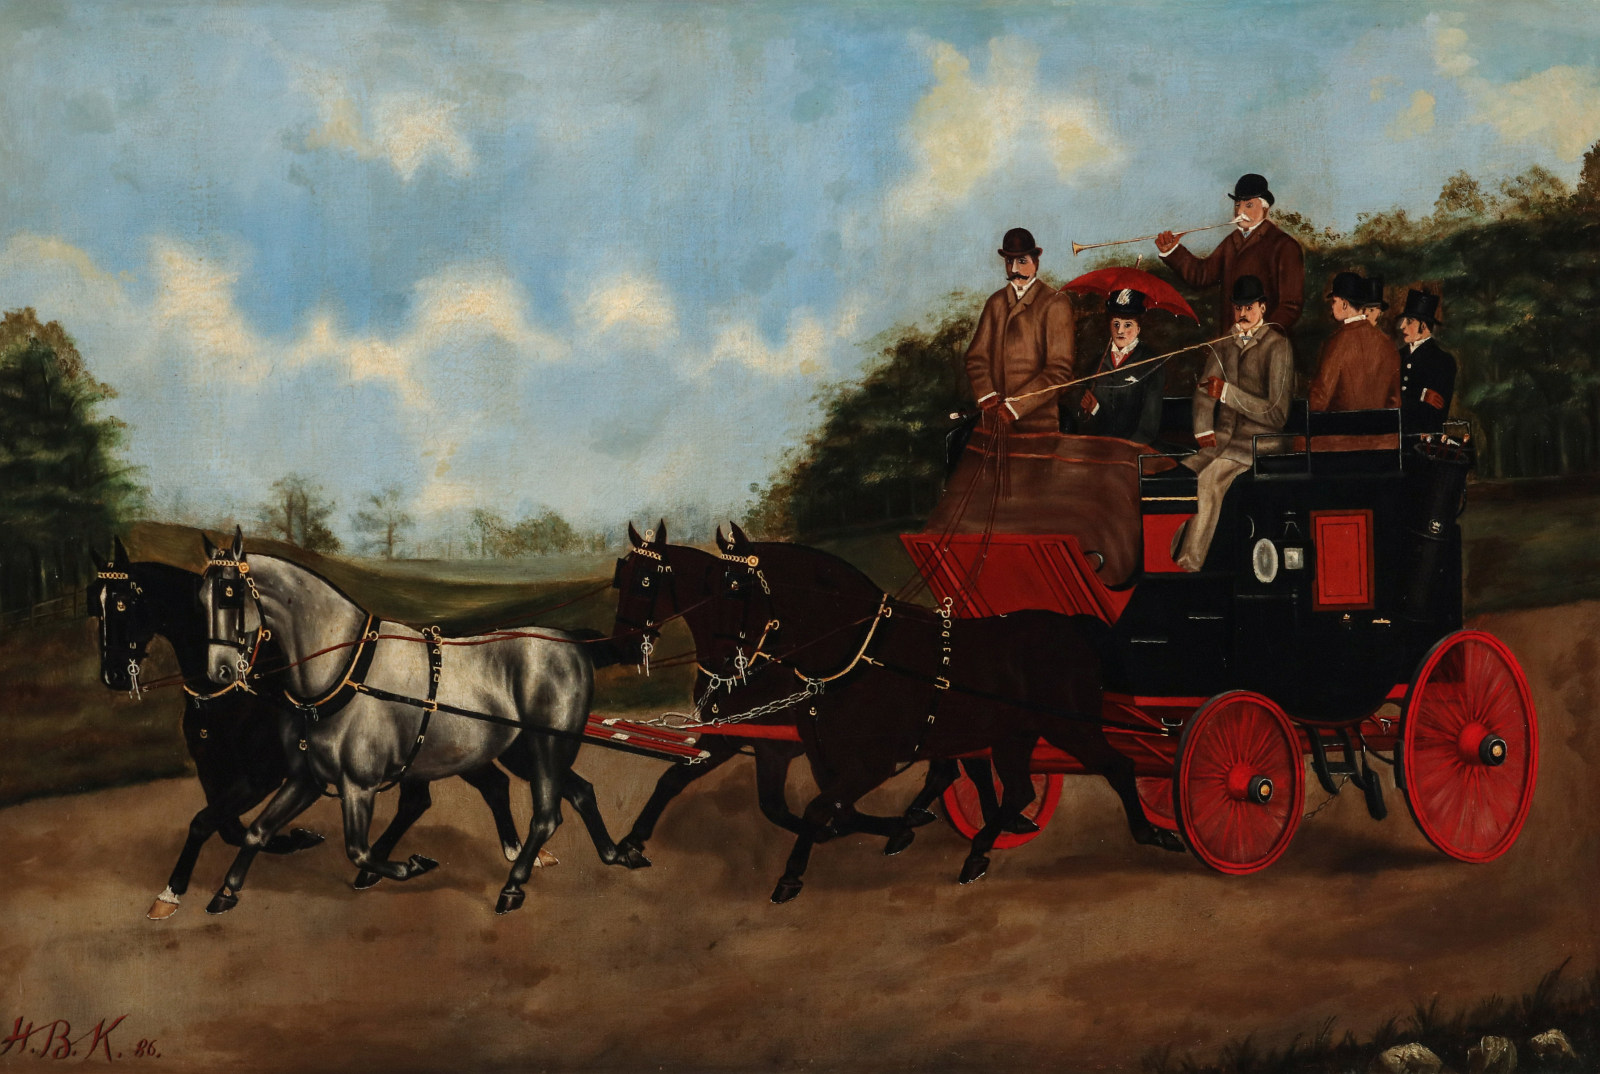 AN 1886 OIL ON CANVAS COACHING SCENE SIGNED H.B.K.